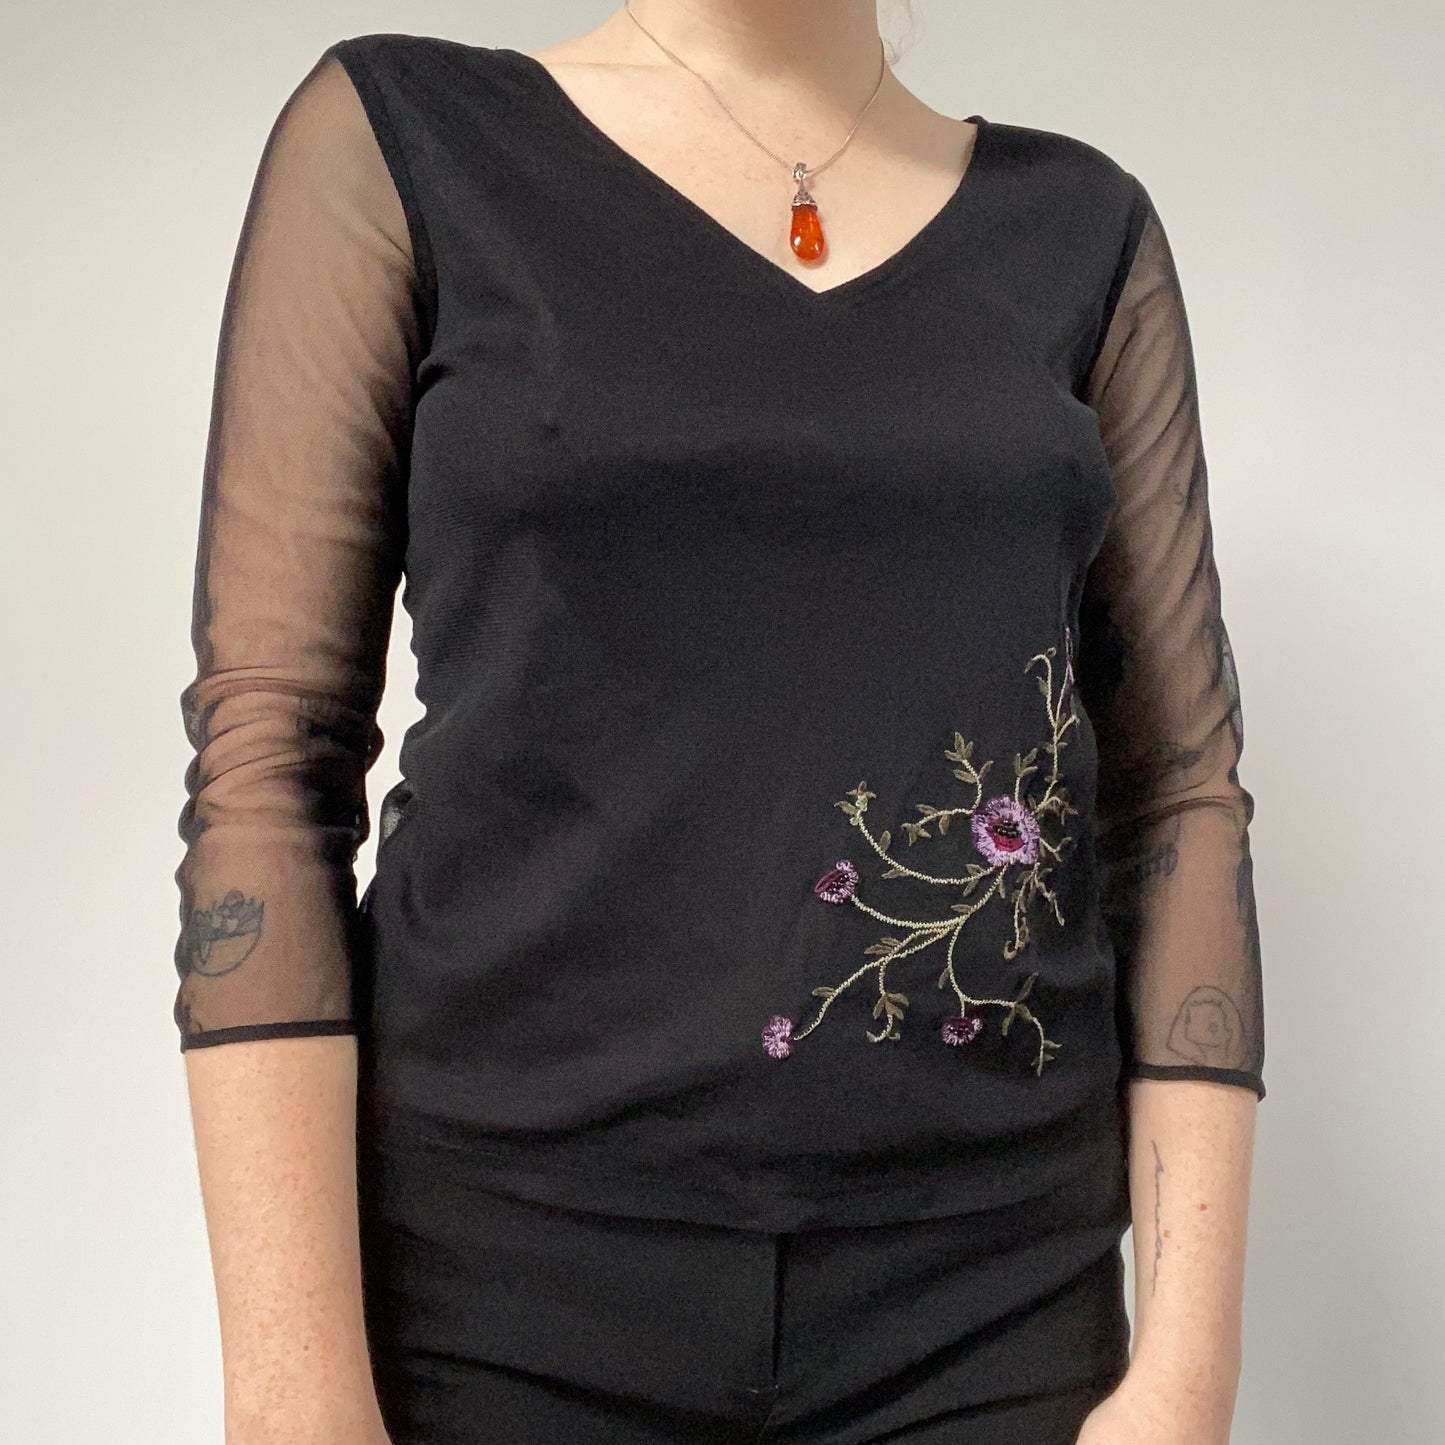 Black embroidered top - size 10